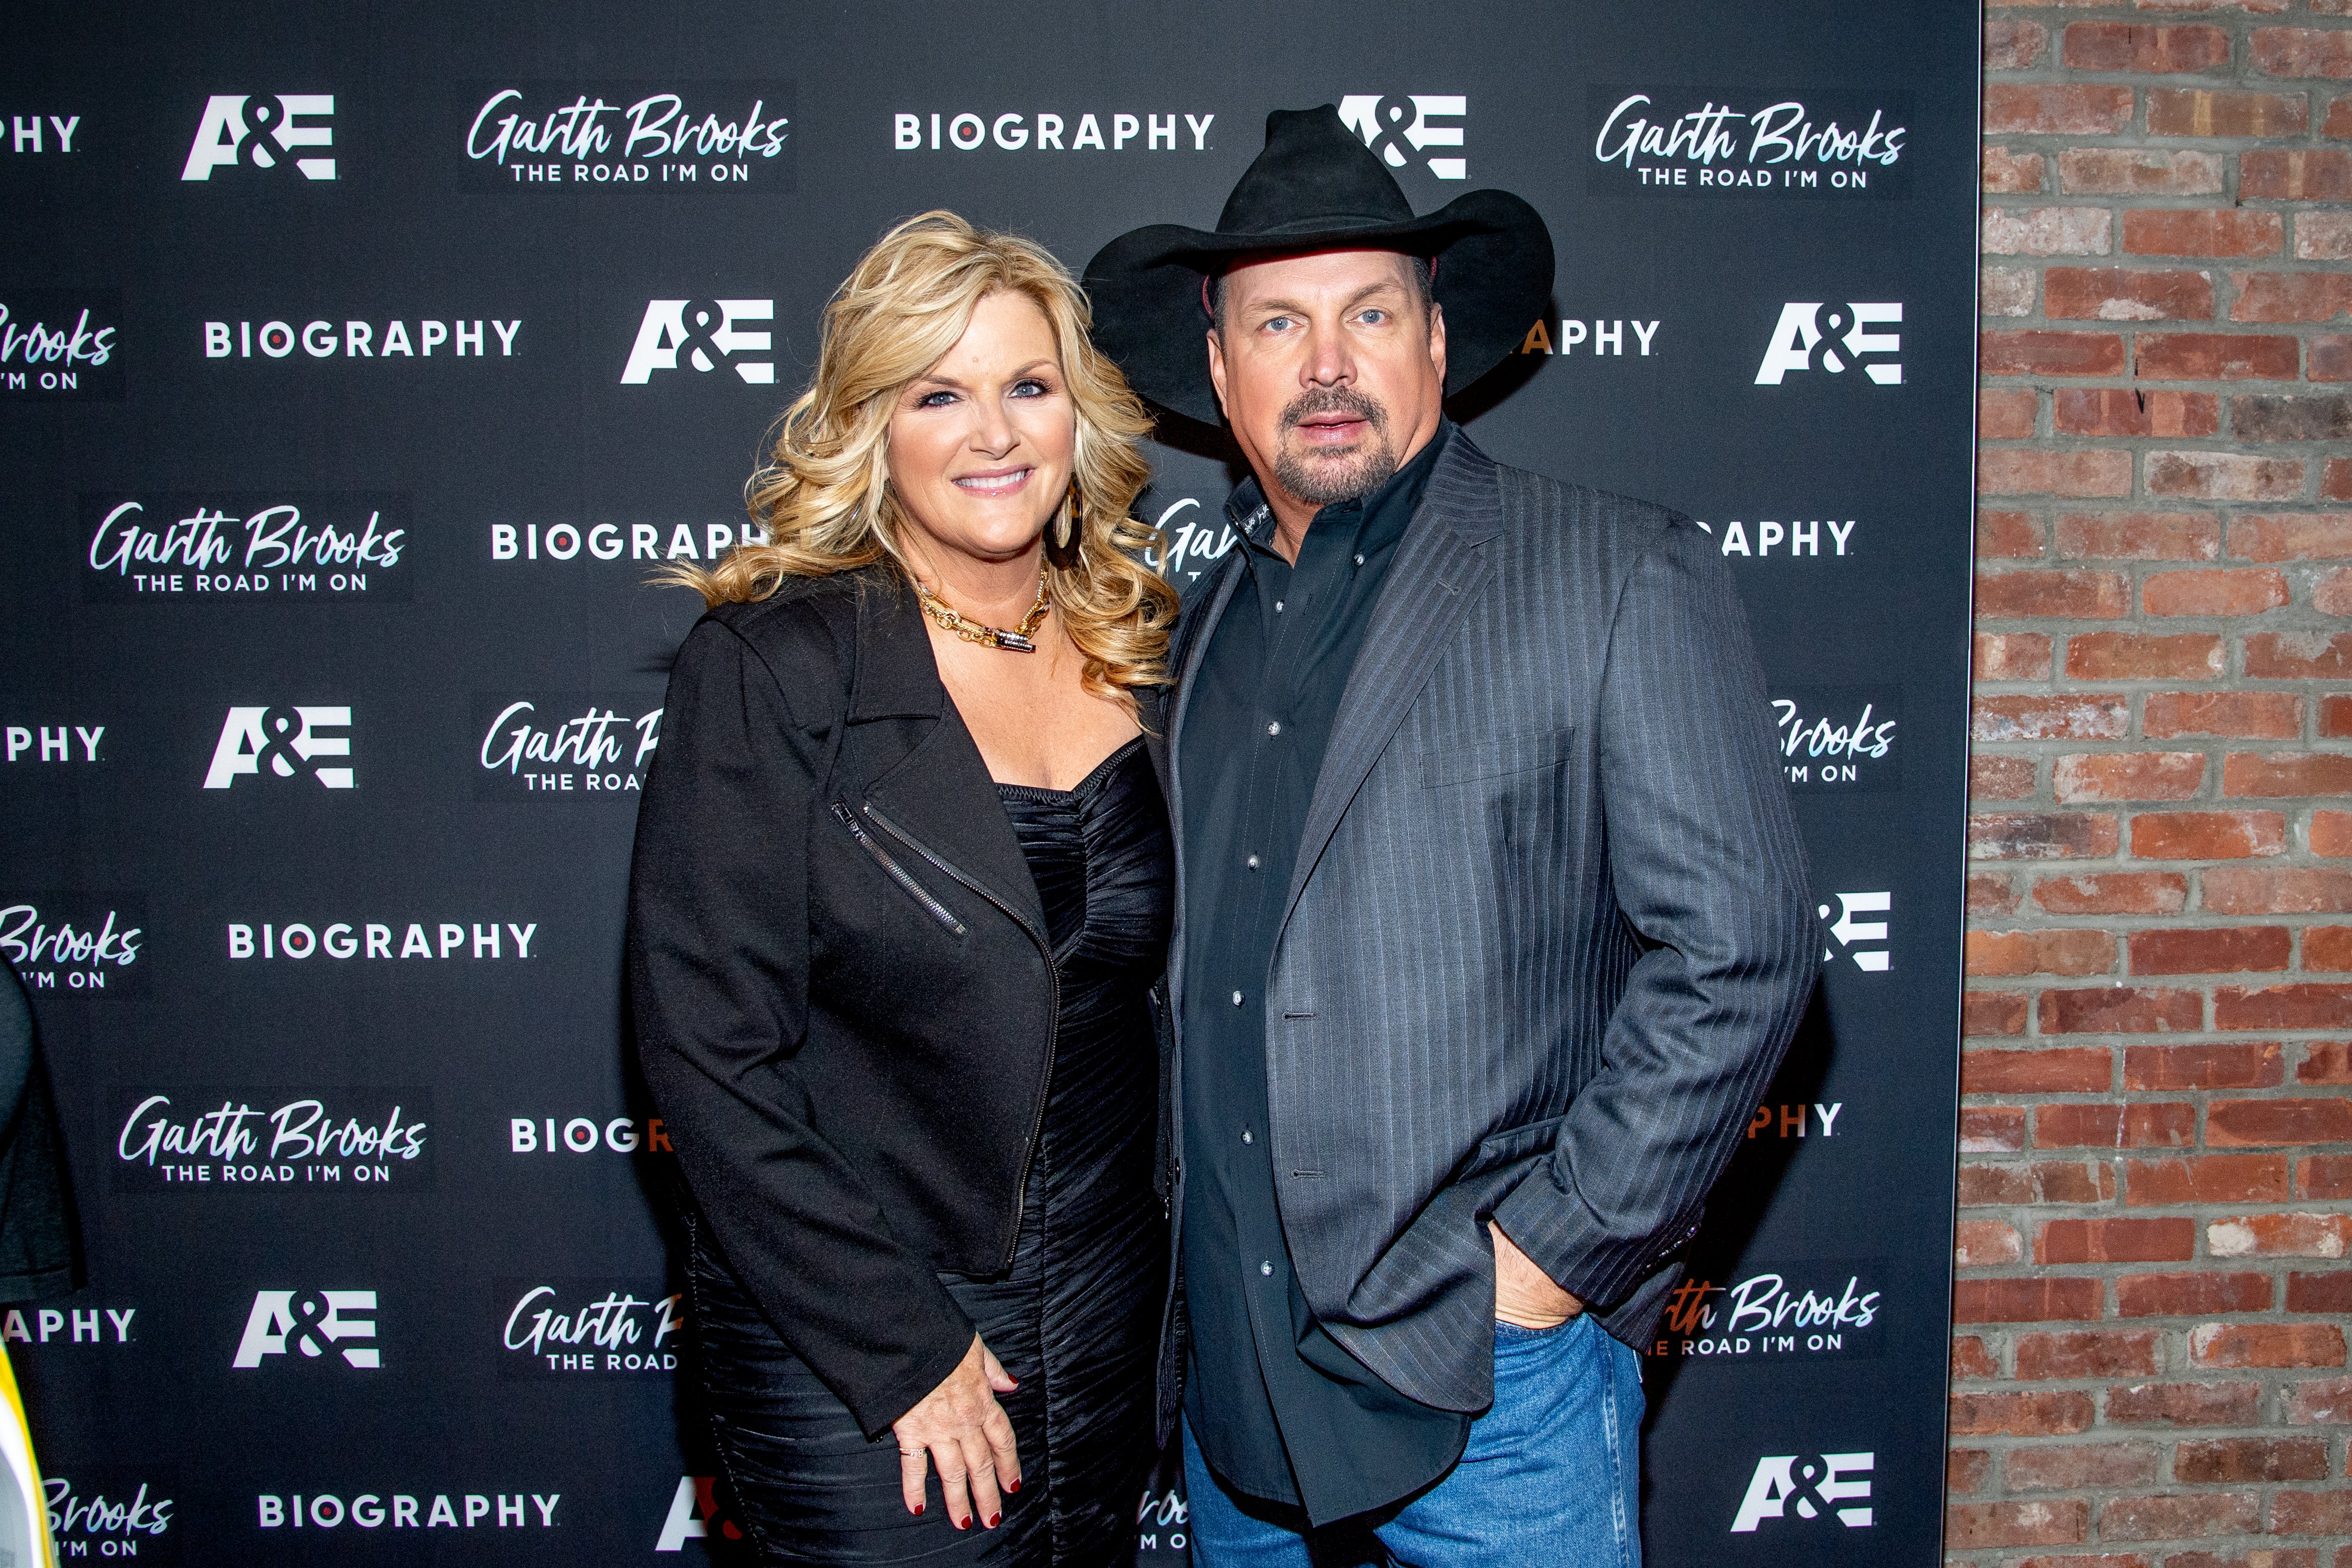 Trisha Yearwood and Garth Brooks attend "Garth Brooks: The Road I'm On" Biography Celebration at The Bowery Hotel on November 18, 2019 in New York City. | Source: Getty Images